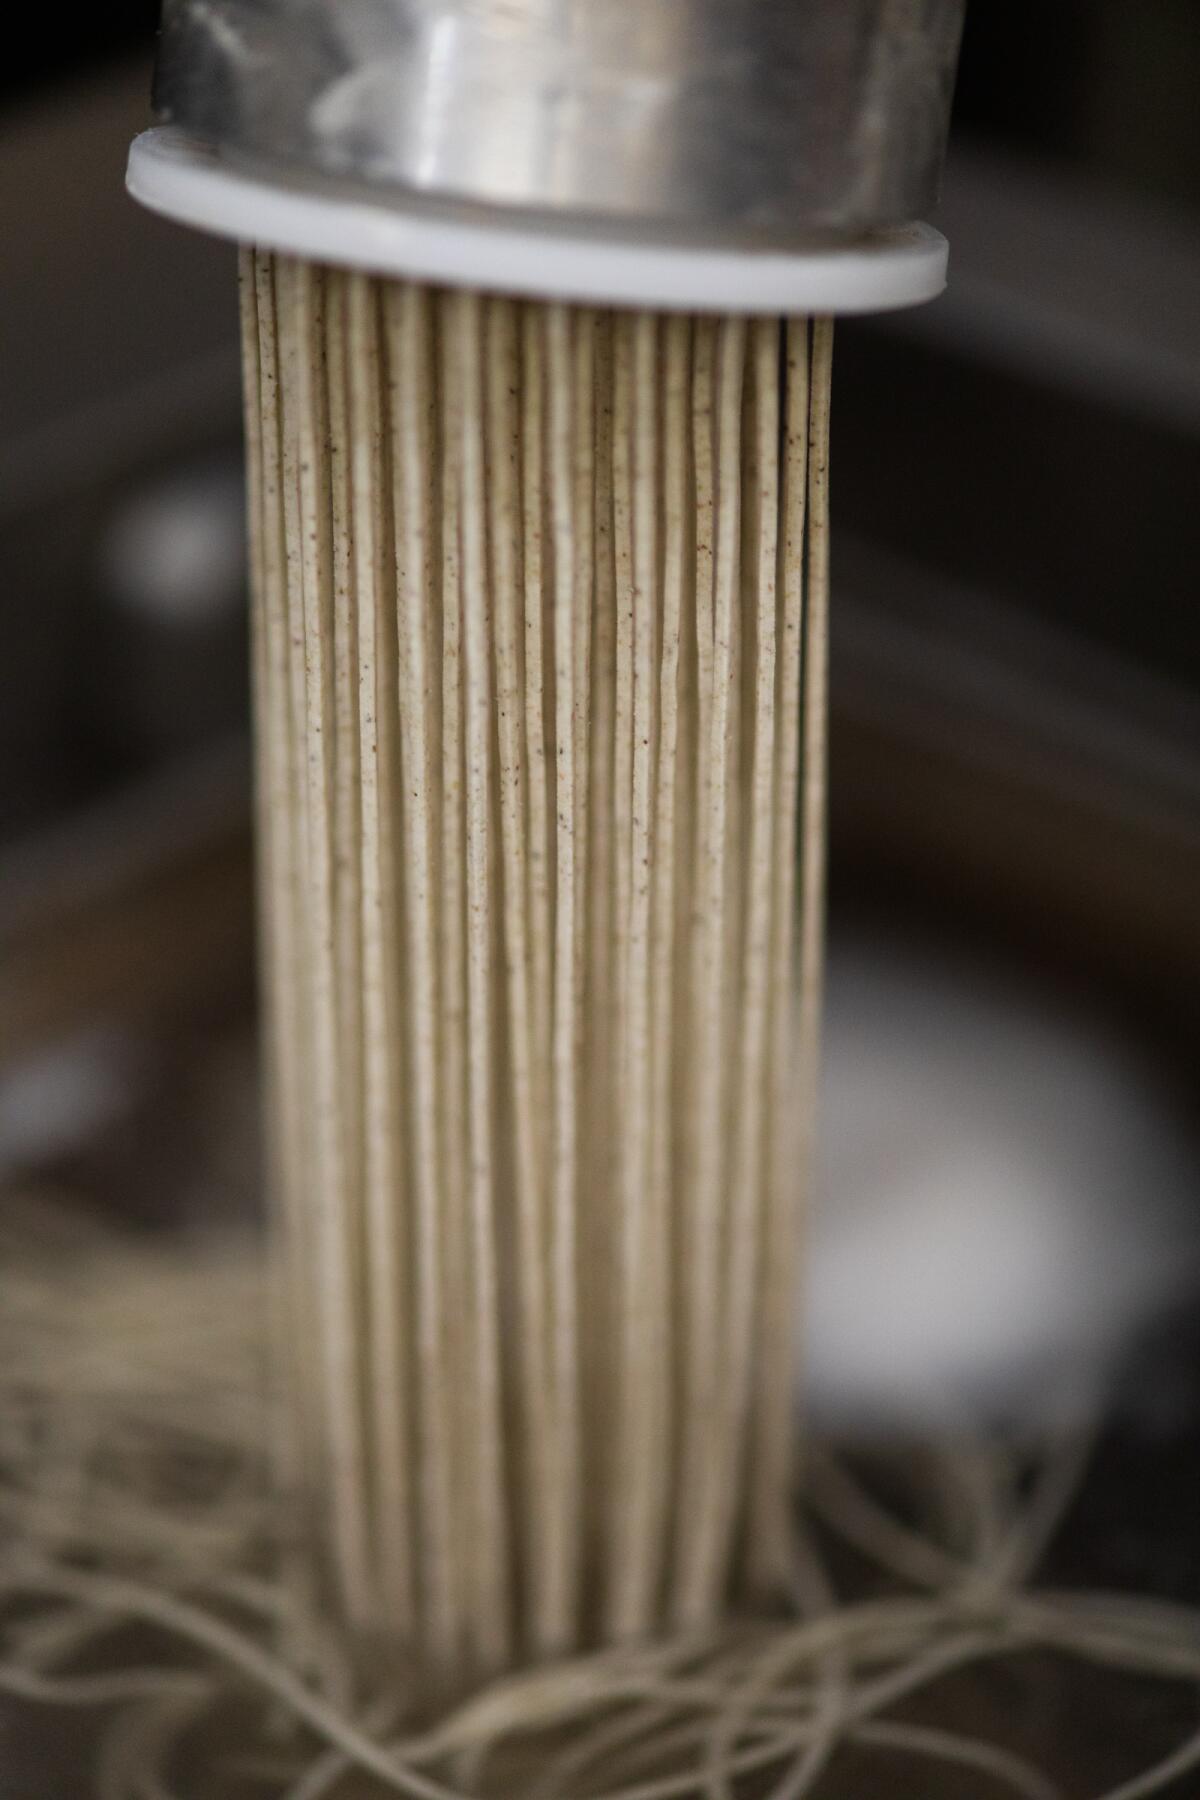 Soba noodles are extruded through a metal machine.